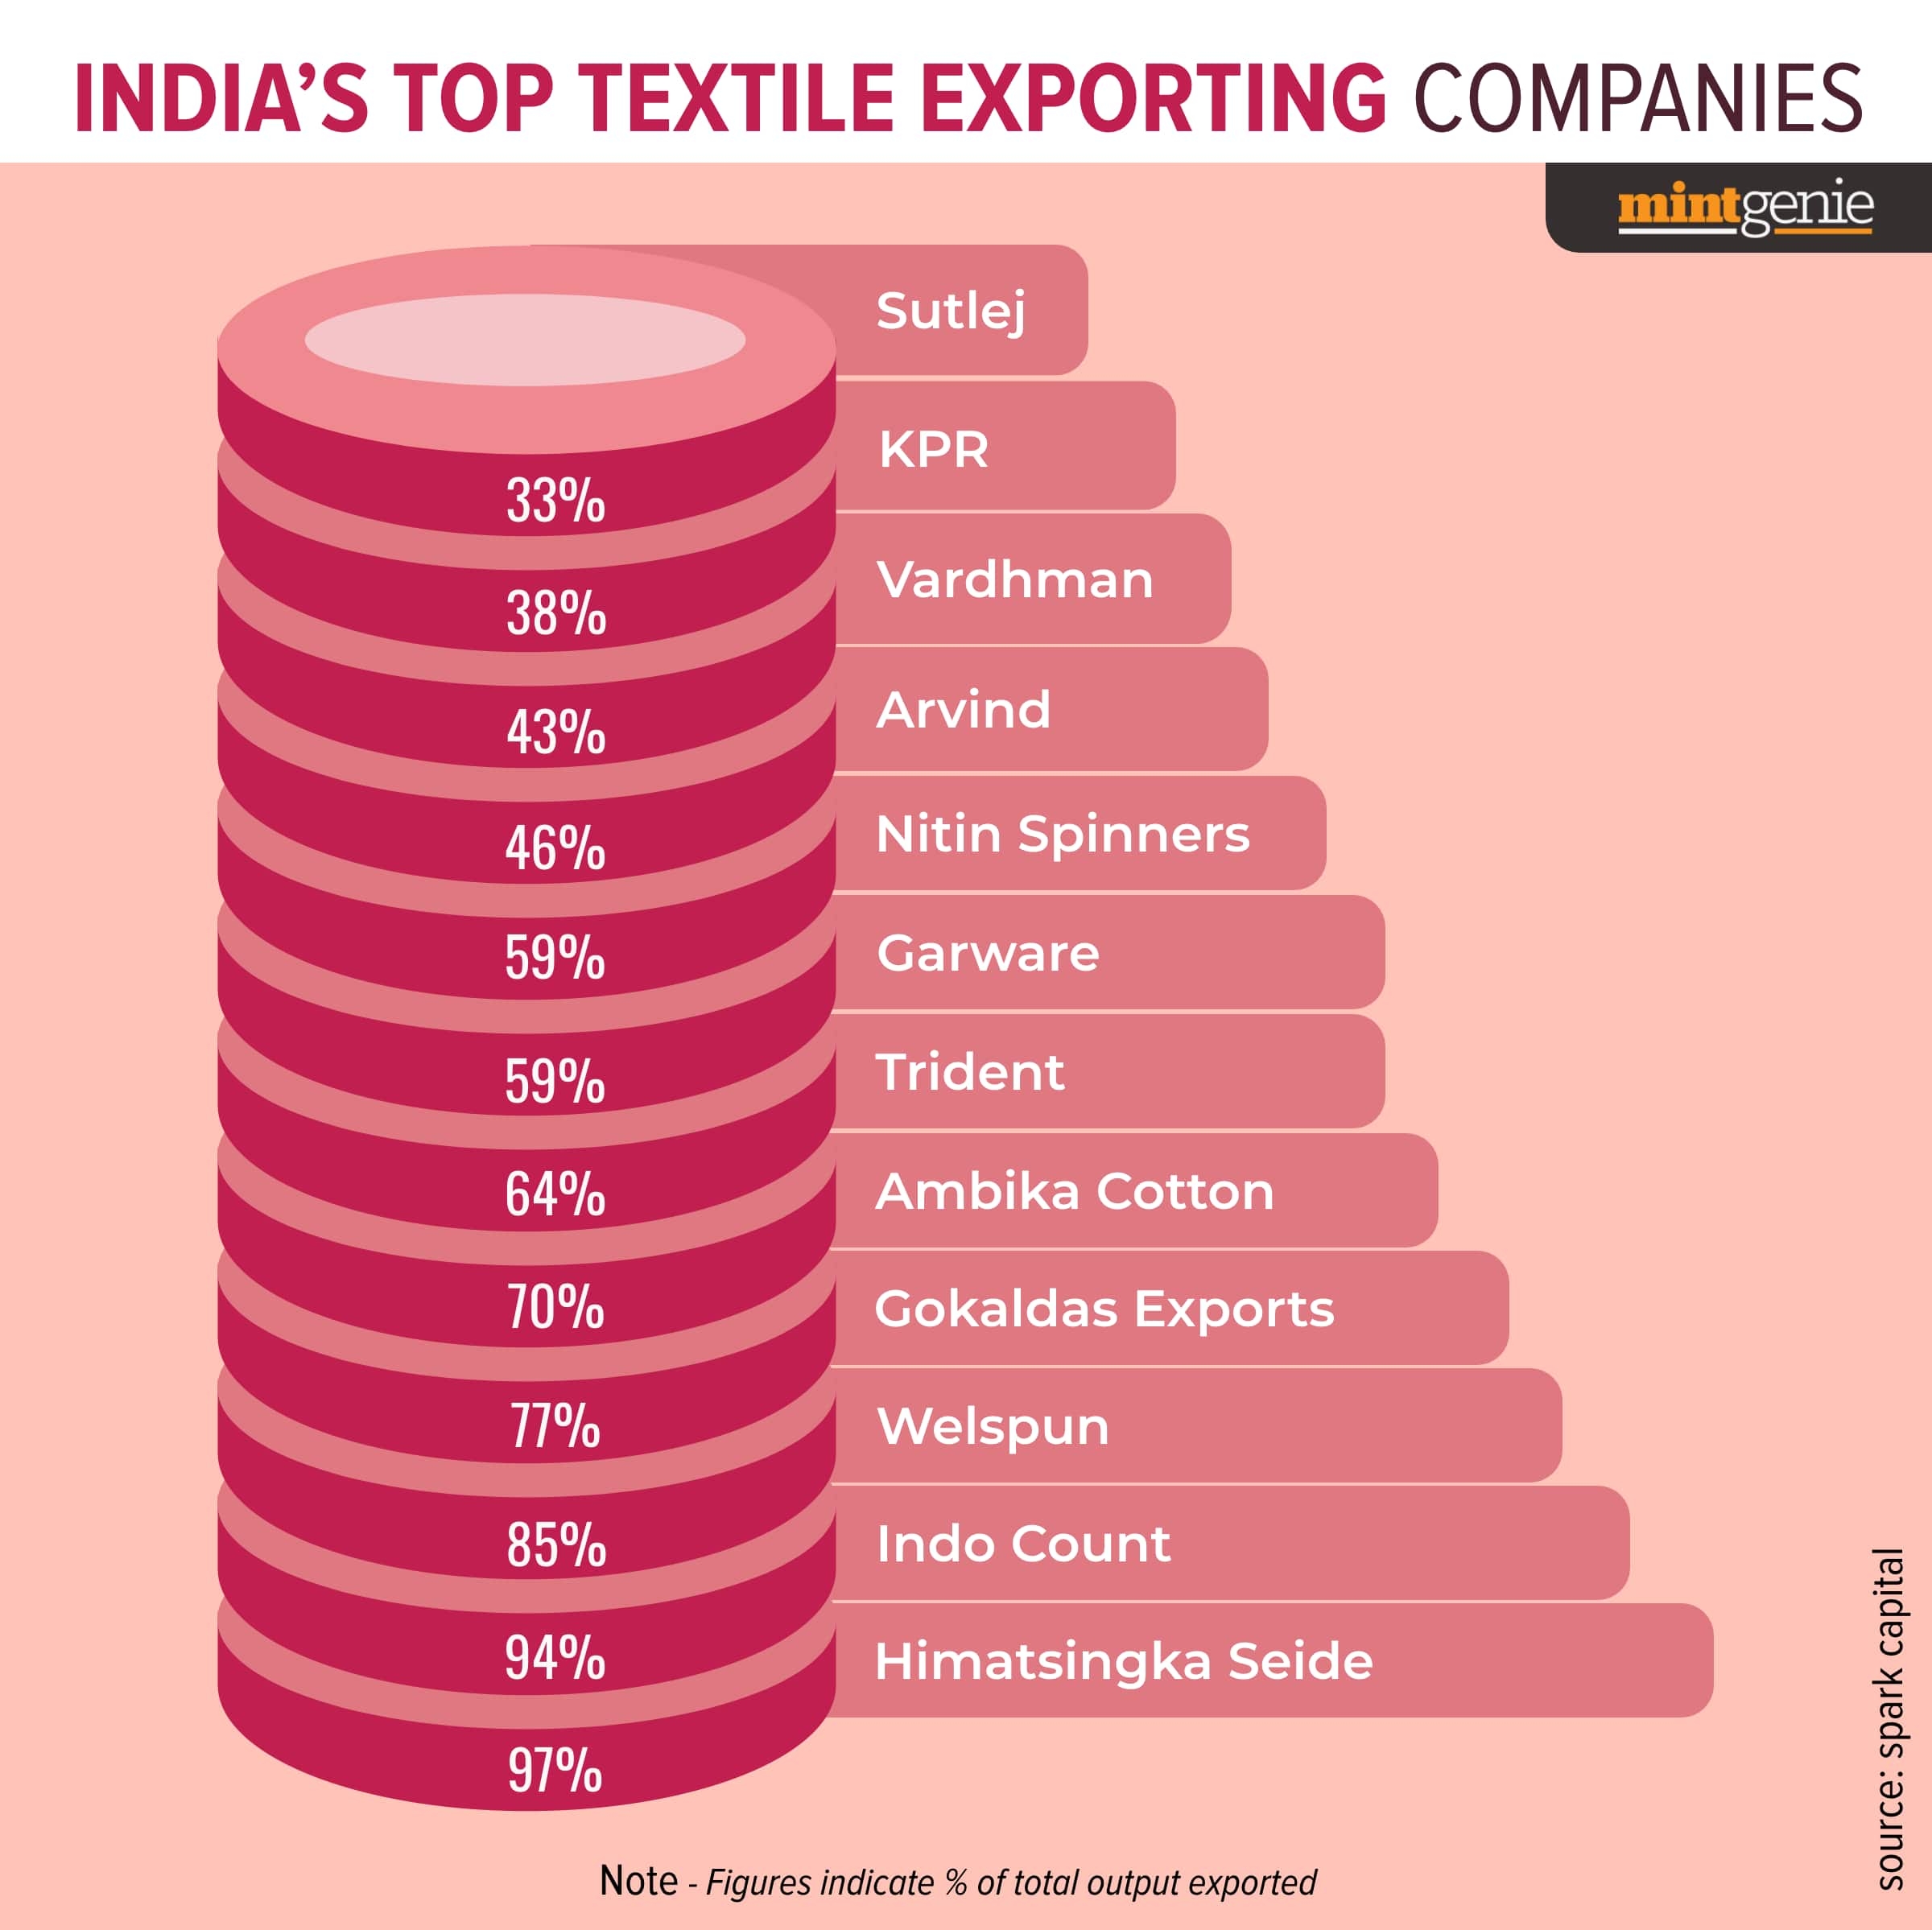 We explain here India's top textile exporting companies